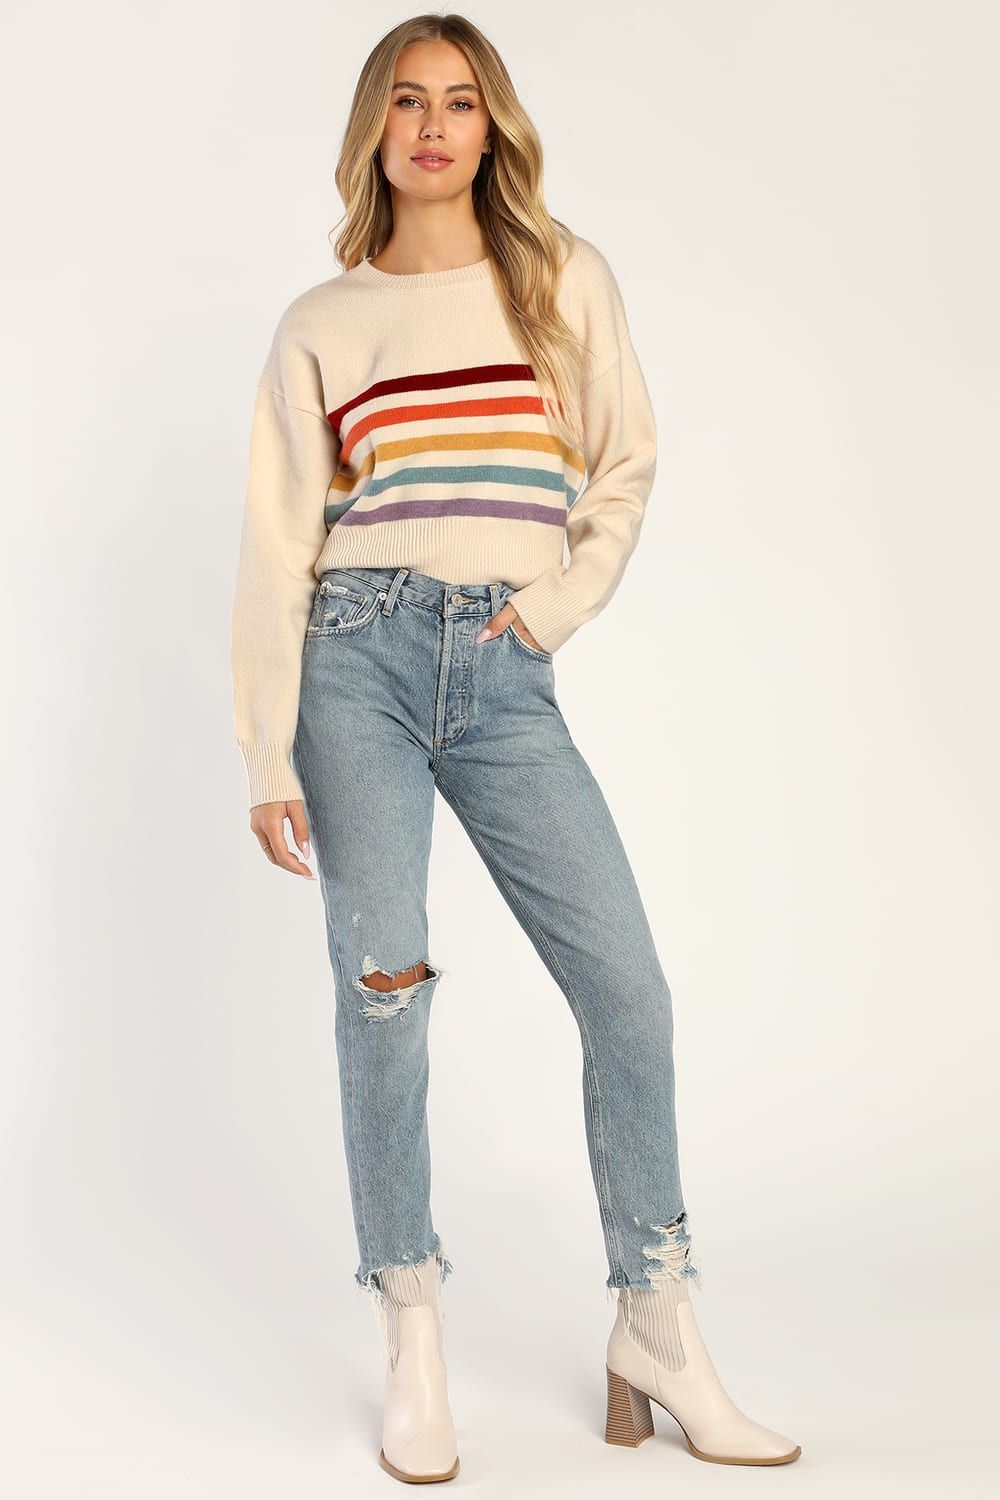 Down to Cuddle Ivory Multi Striped Pullover Sweater | Lulus (US)